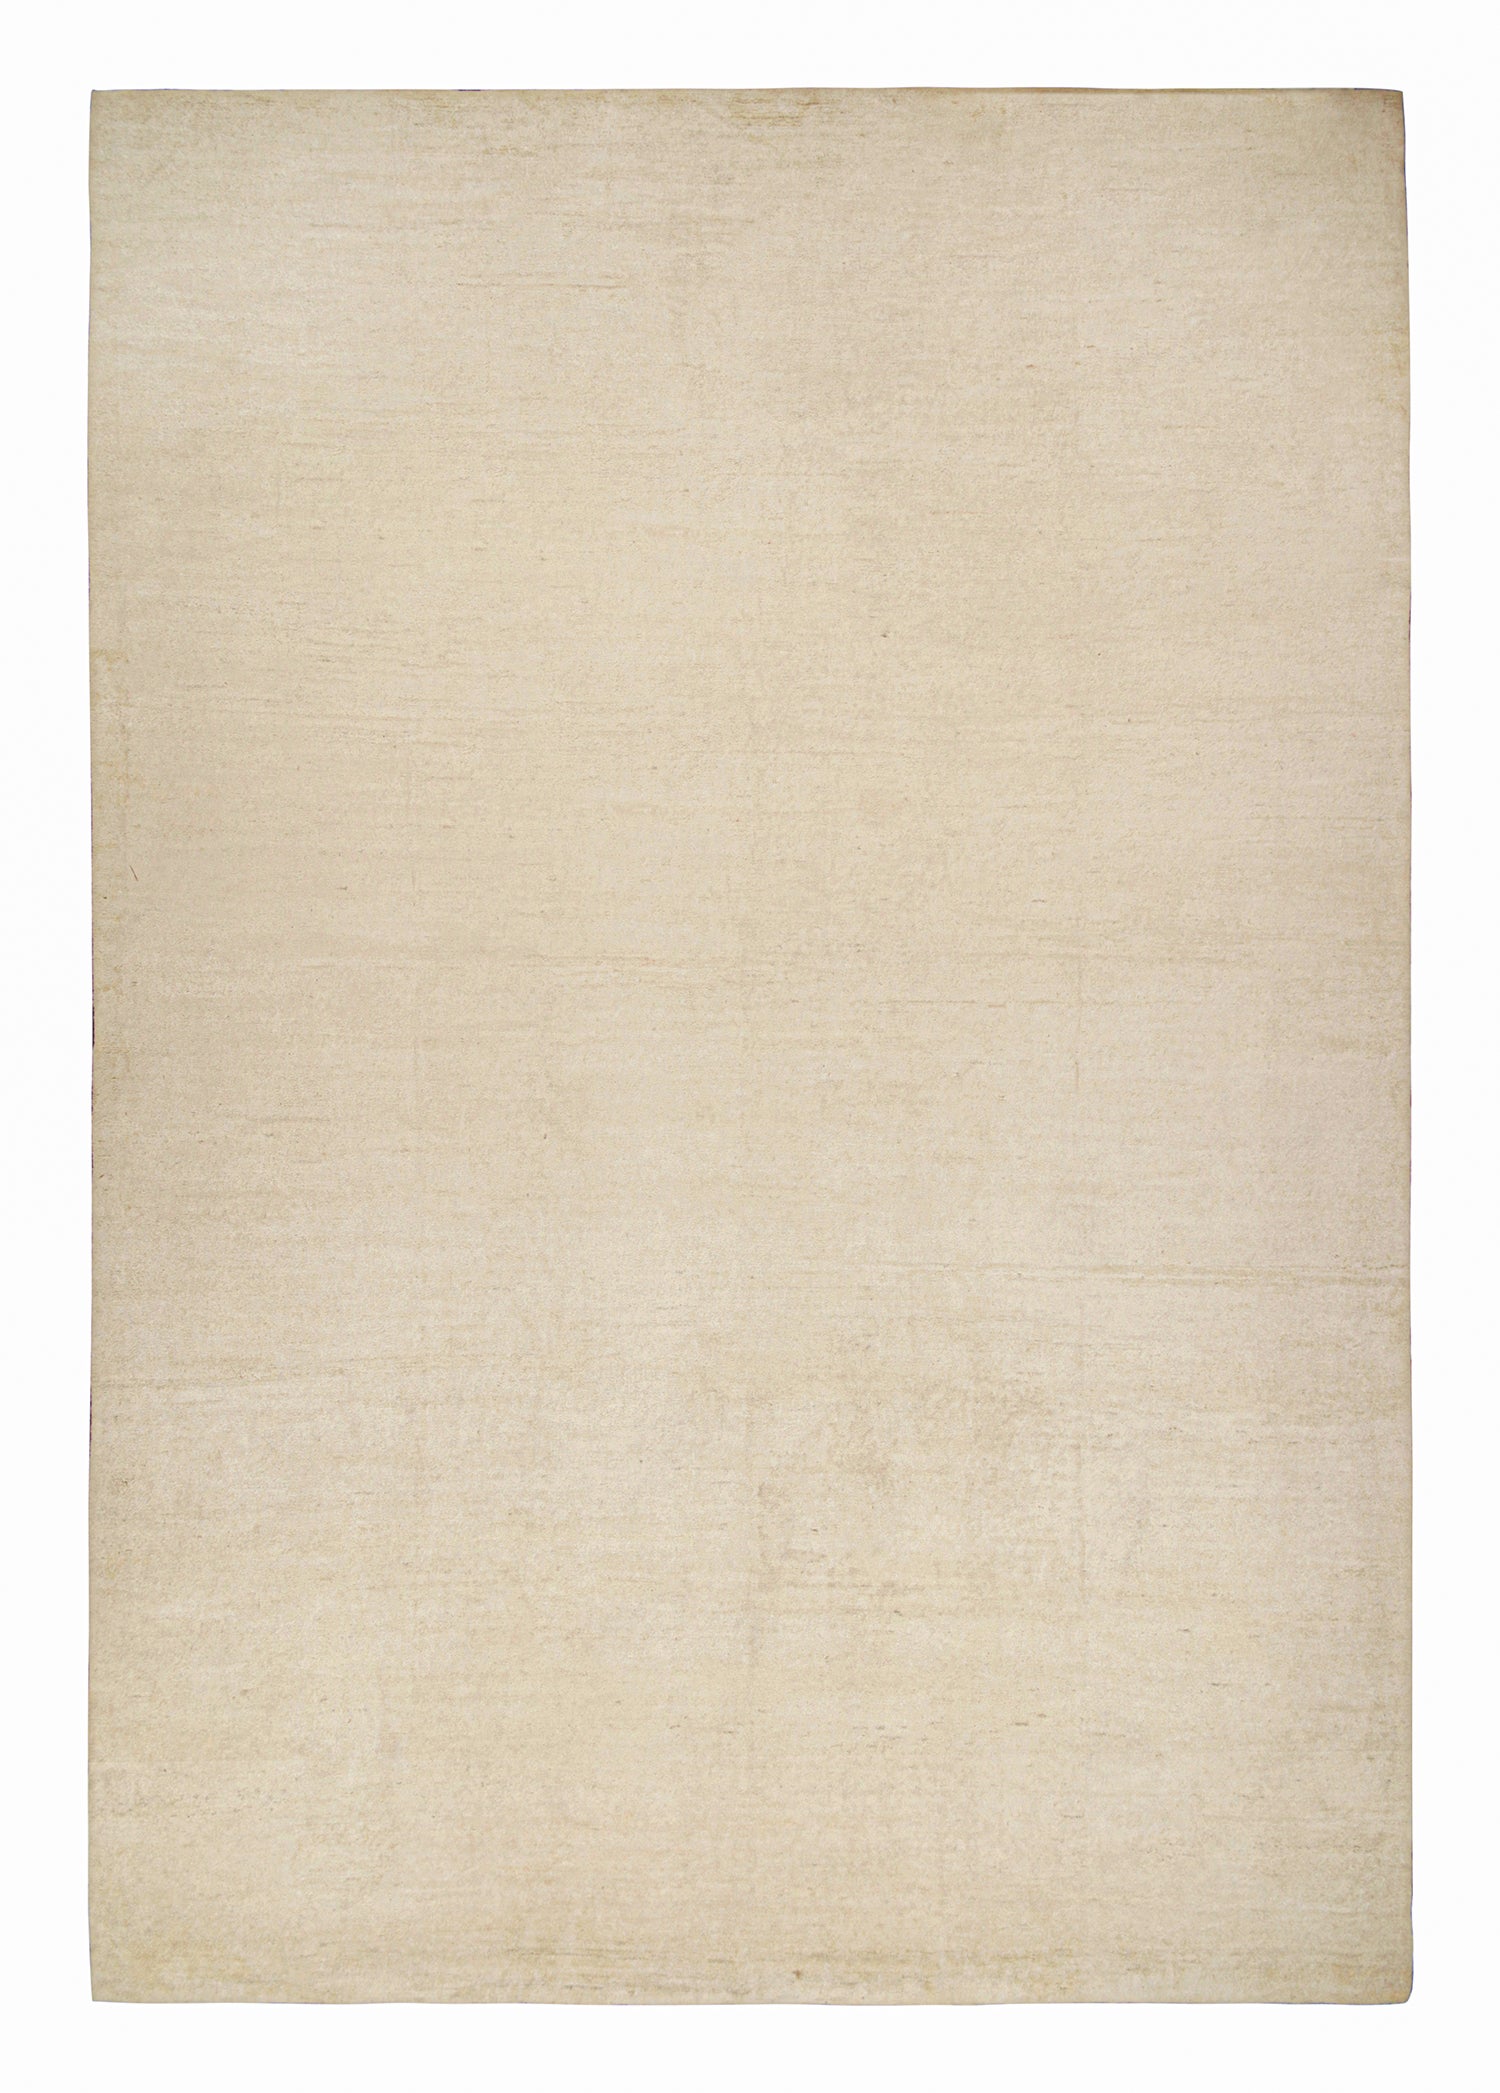 Rug & Kilim’s Solid Beige-Brown Rug in Tone-on-tone Contemporary Style